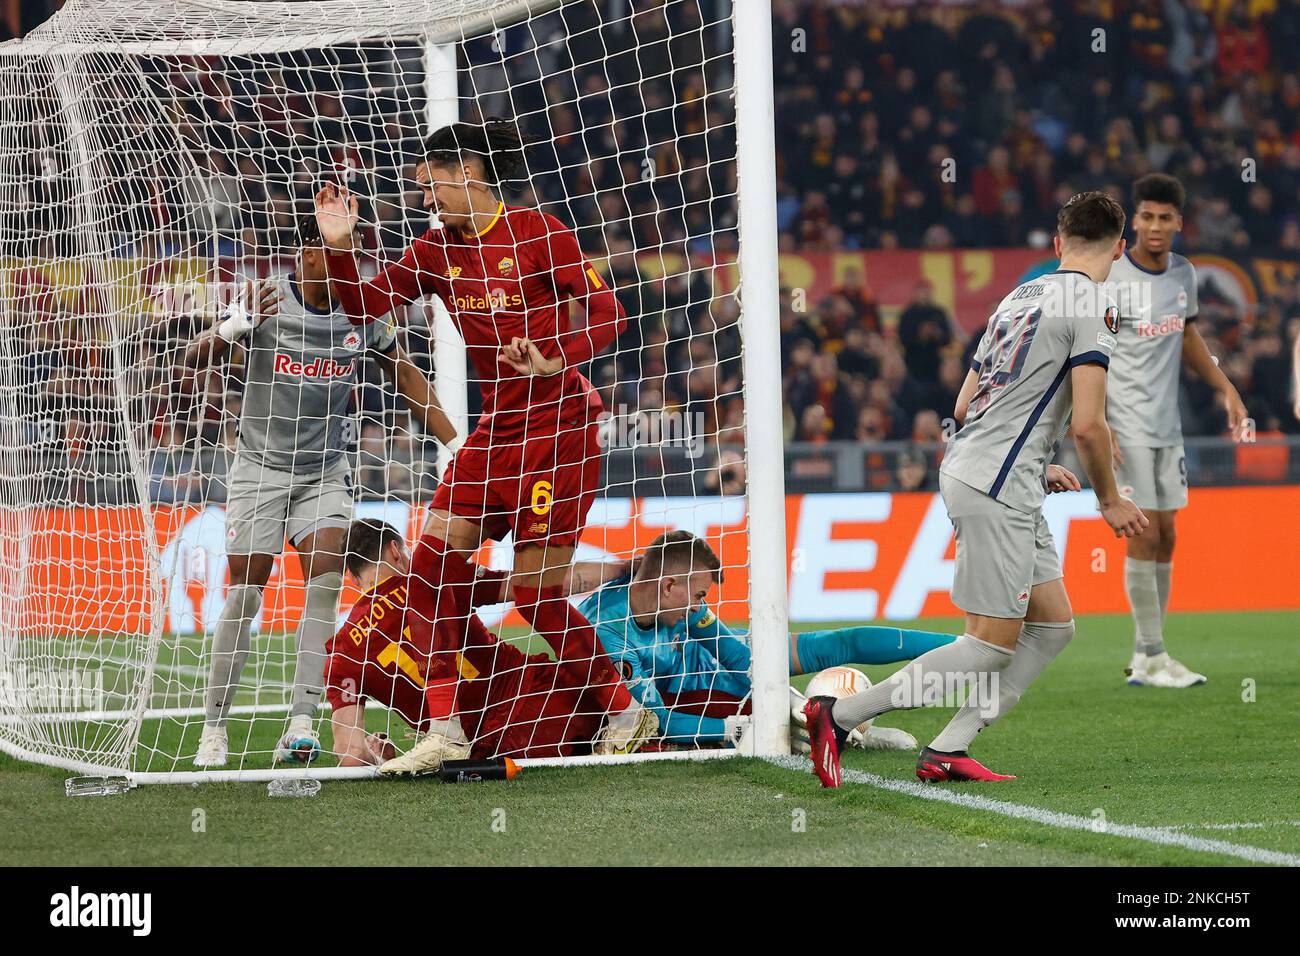 Rome, Italy. 23rd Feb, 2023. Philipp Kohn of Salzburg Andrea Bellotti of AS Roma Chris Smalling of AS Roma during AS Roma vs RB Salzburg, football Europa League match in Rome, Italy, February 23 2023 Credit: Independent Photo Agency/Alamy Live News Stock Photo